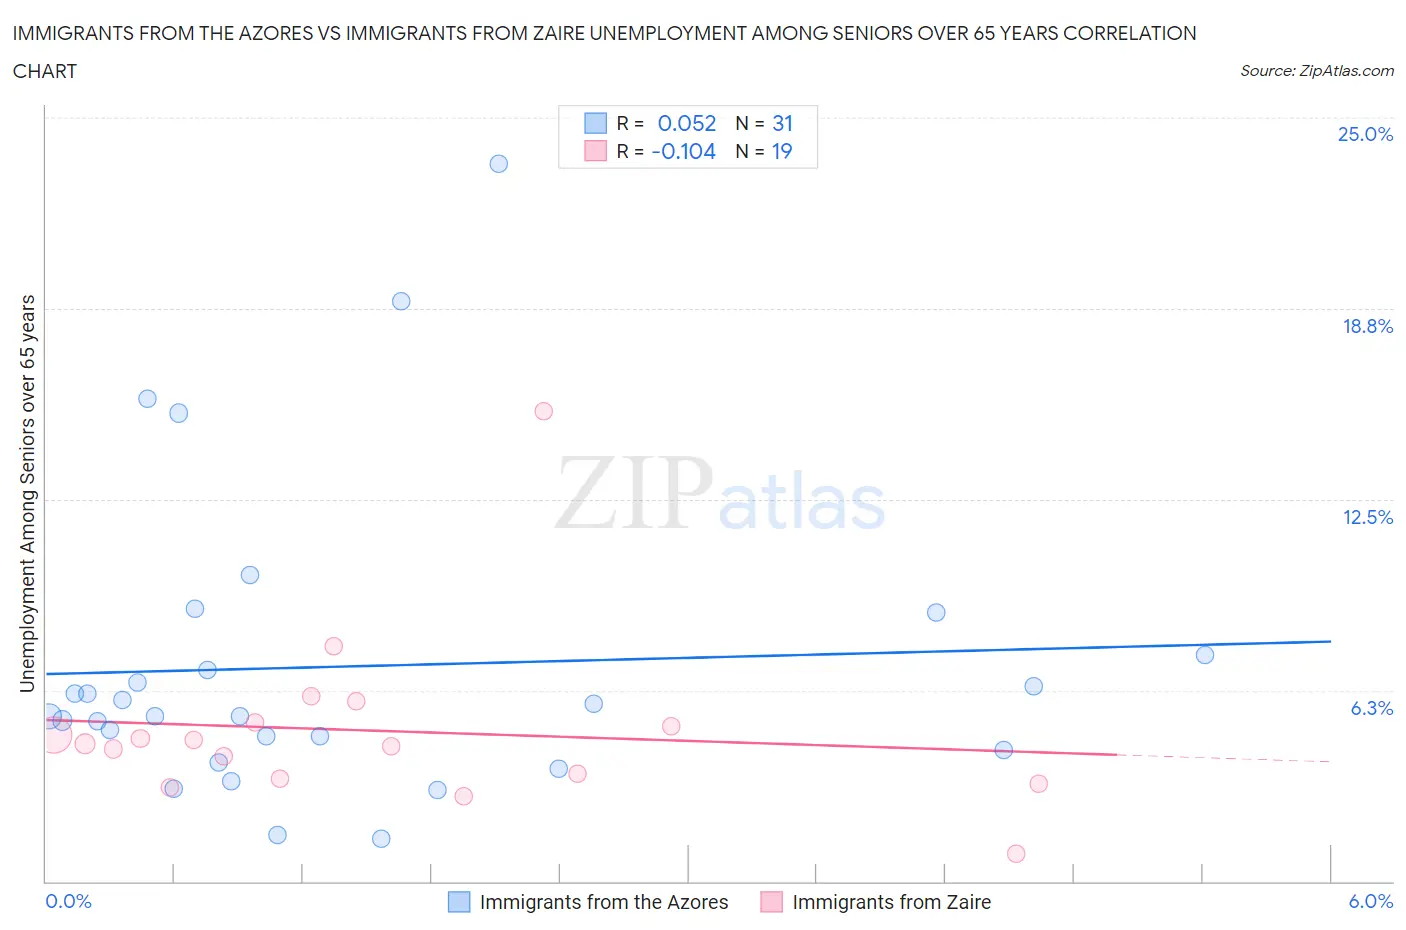 Immigrants from the Azores vs Immigrants from Zaire Unemployment Among Seniors over 65 years